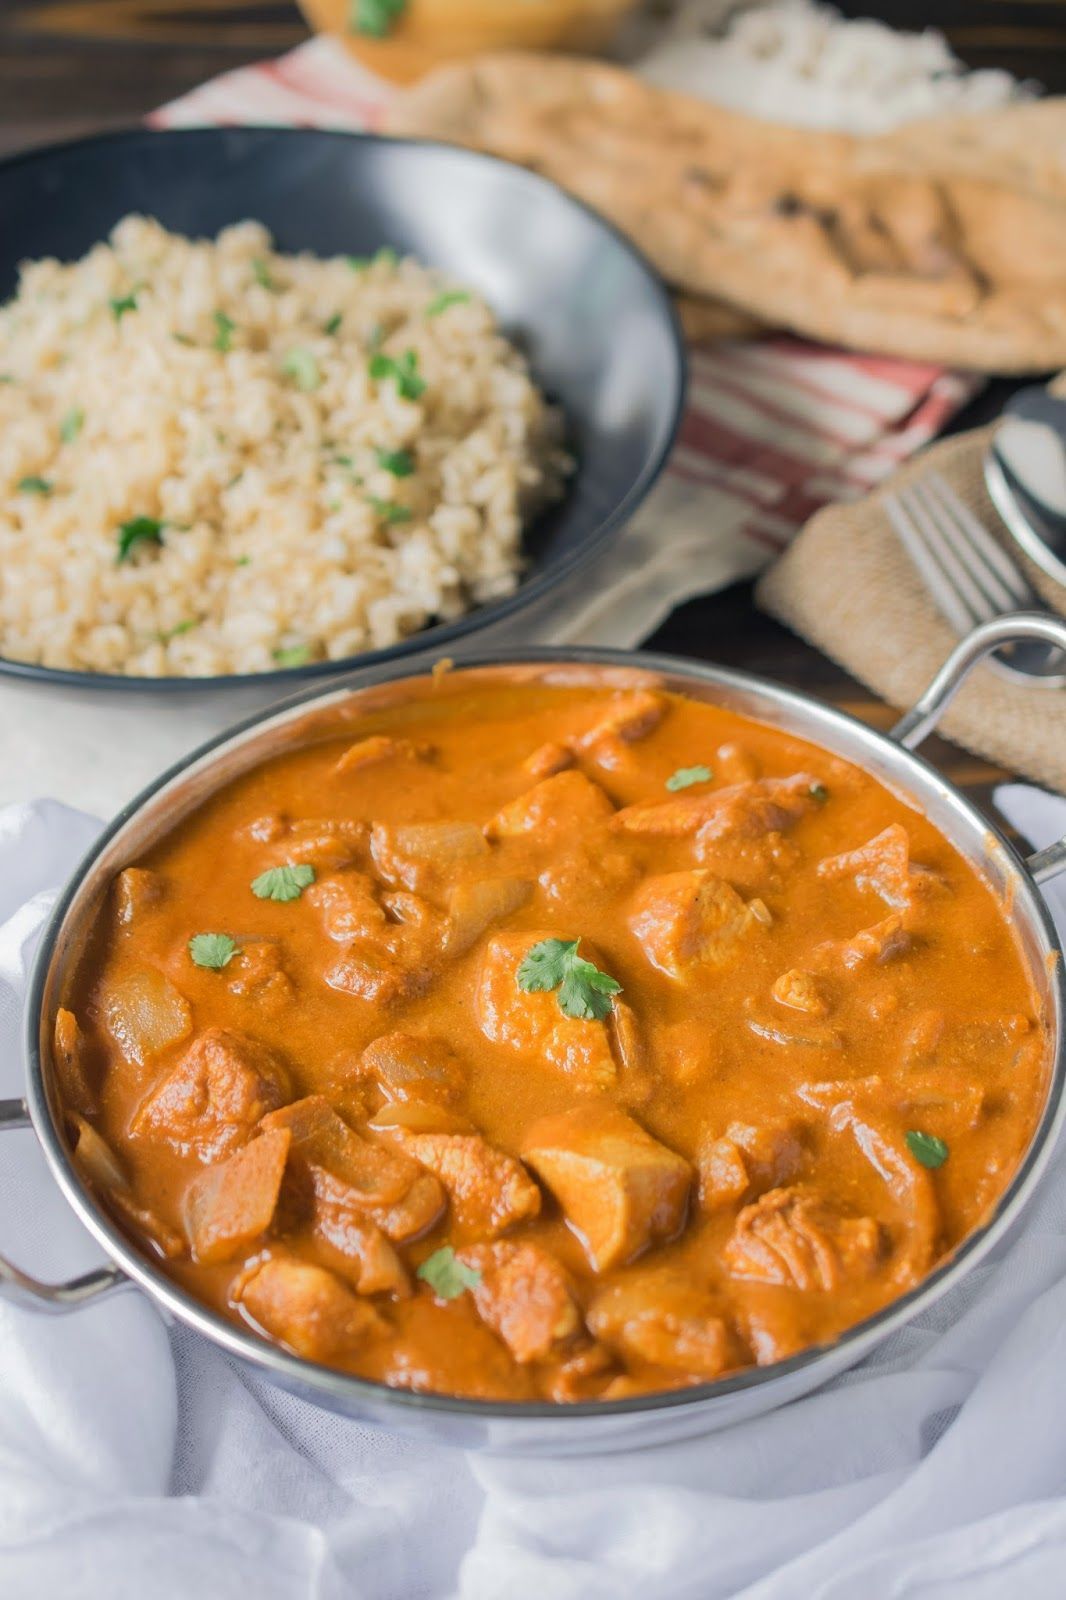 Chicken tikka masala. A classic popular Indian dish that is so full of flavor and so easy to make and